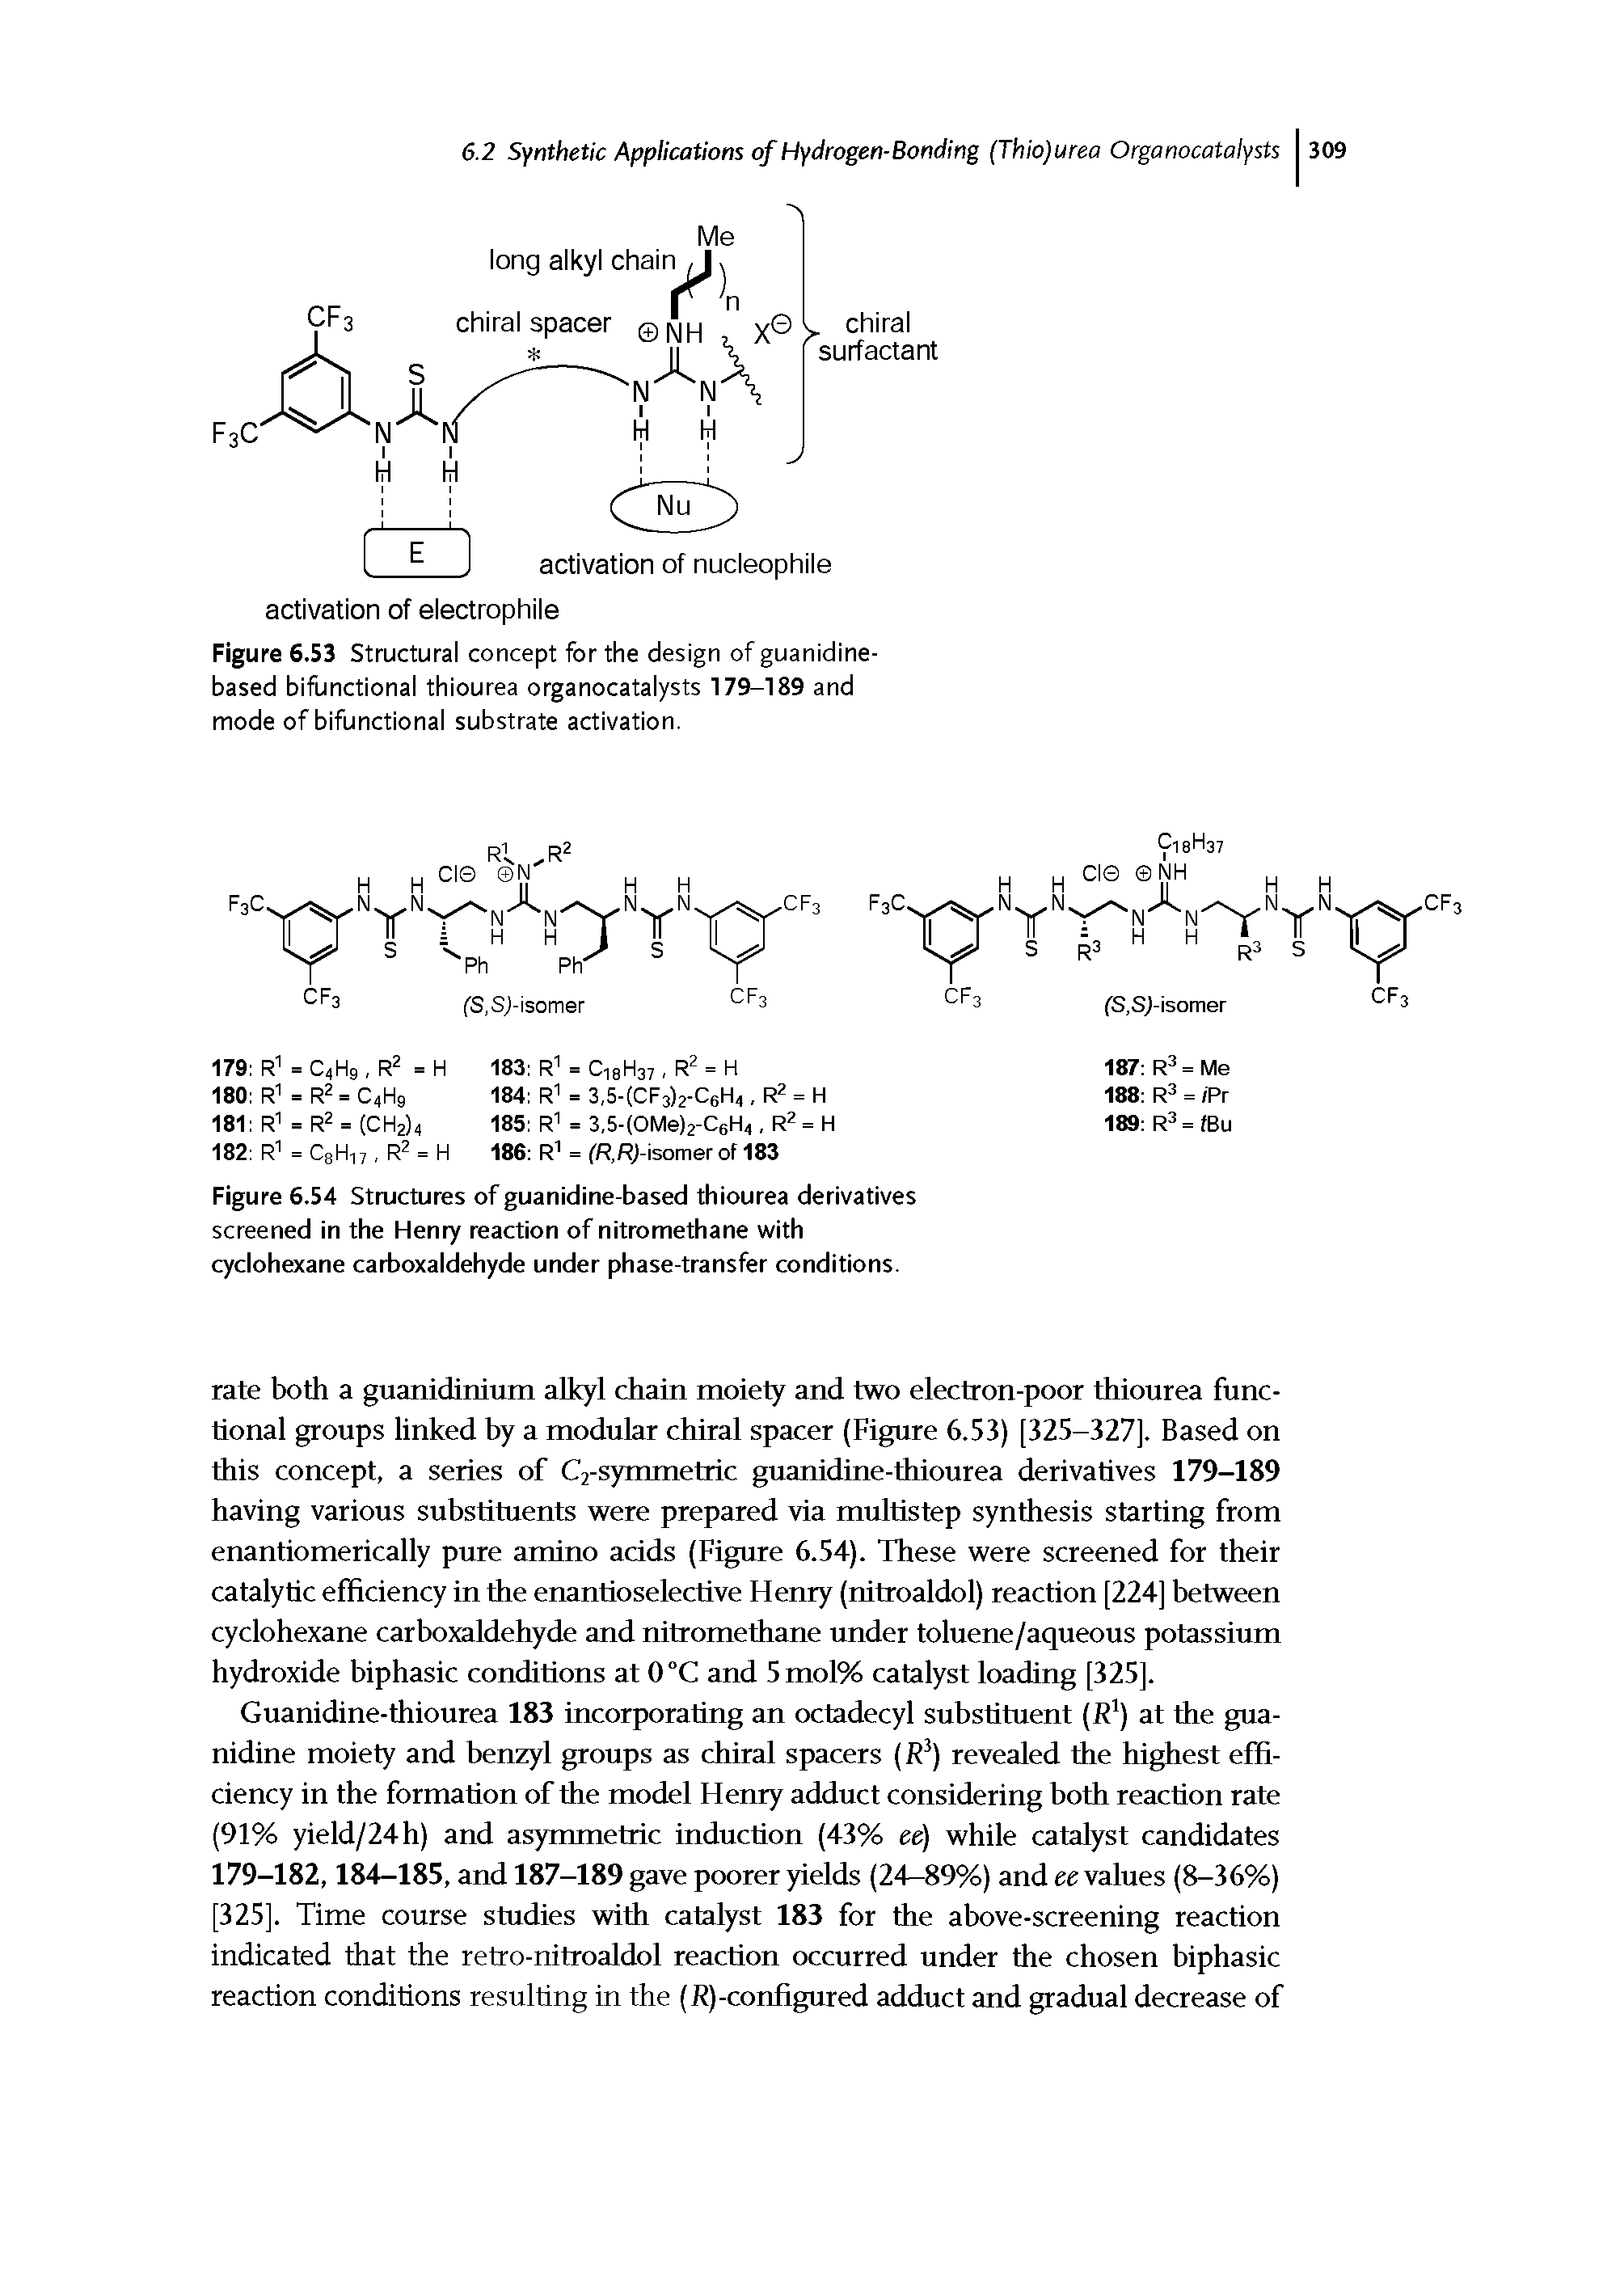 Figure 6.54 Structures of guanidine-based thiourea derivatives screened in the Henry reaction of nitromethane with cyclohexane carboxaldehyde under phase-transfer conditions.